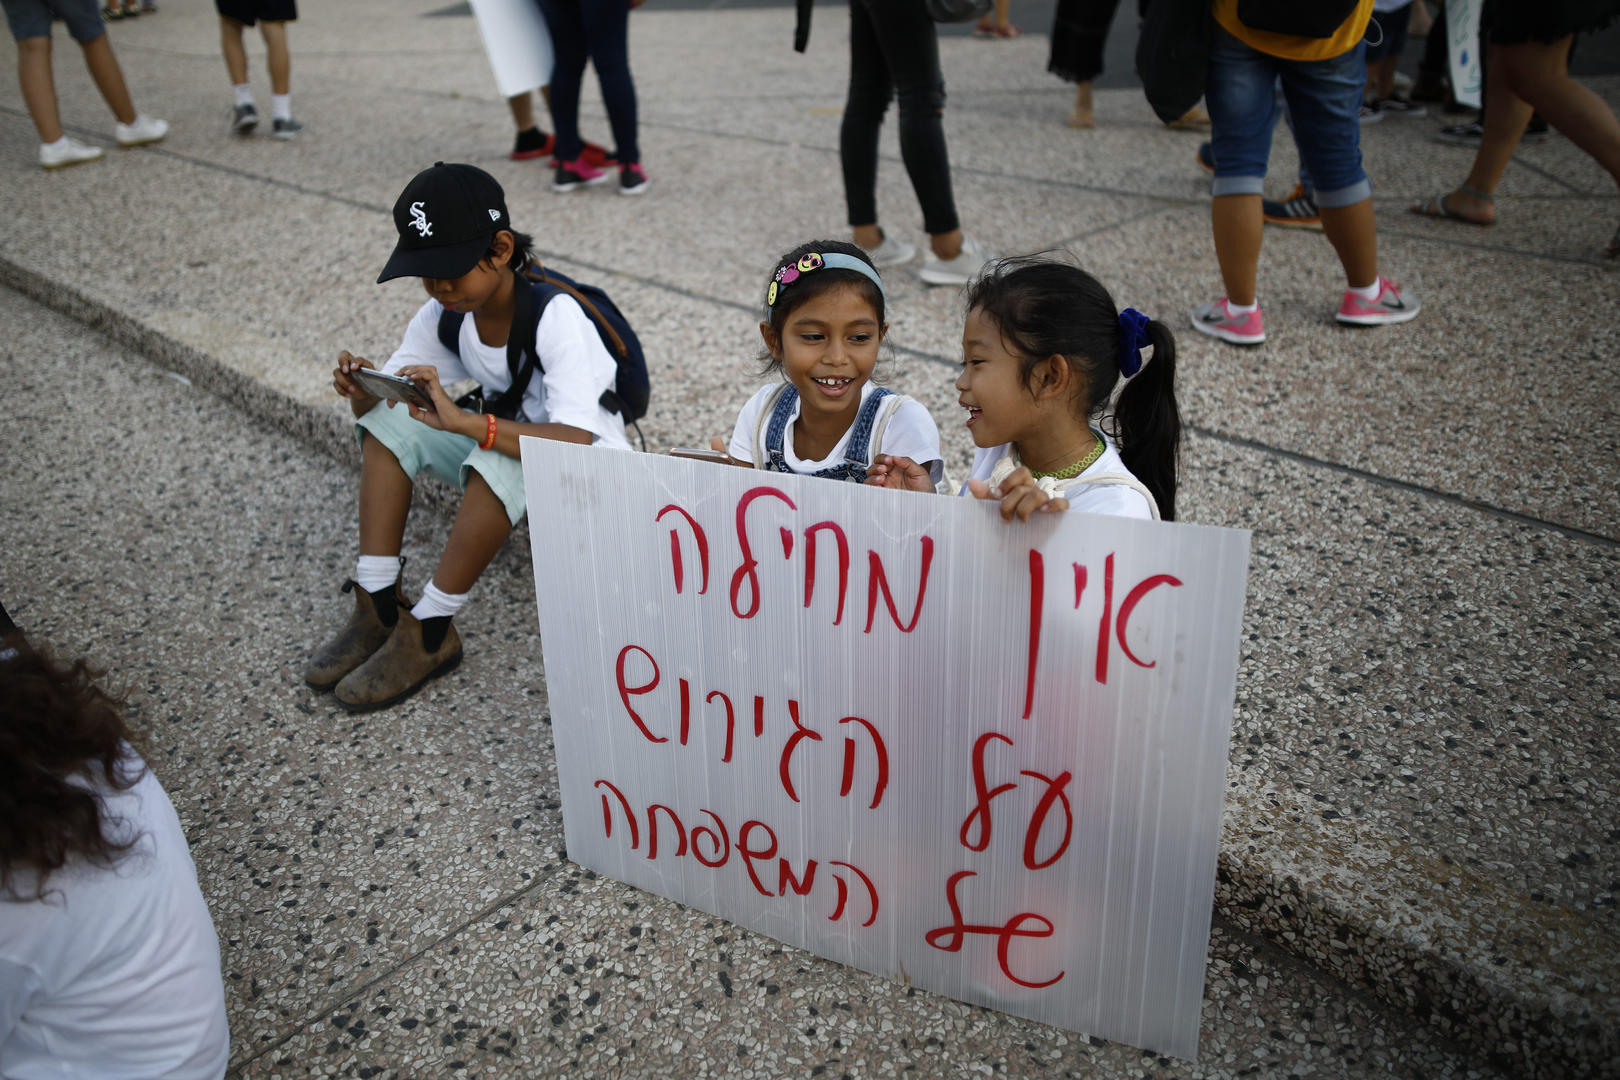 Children hold a sign at a protest.